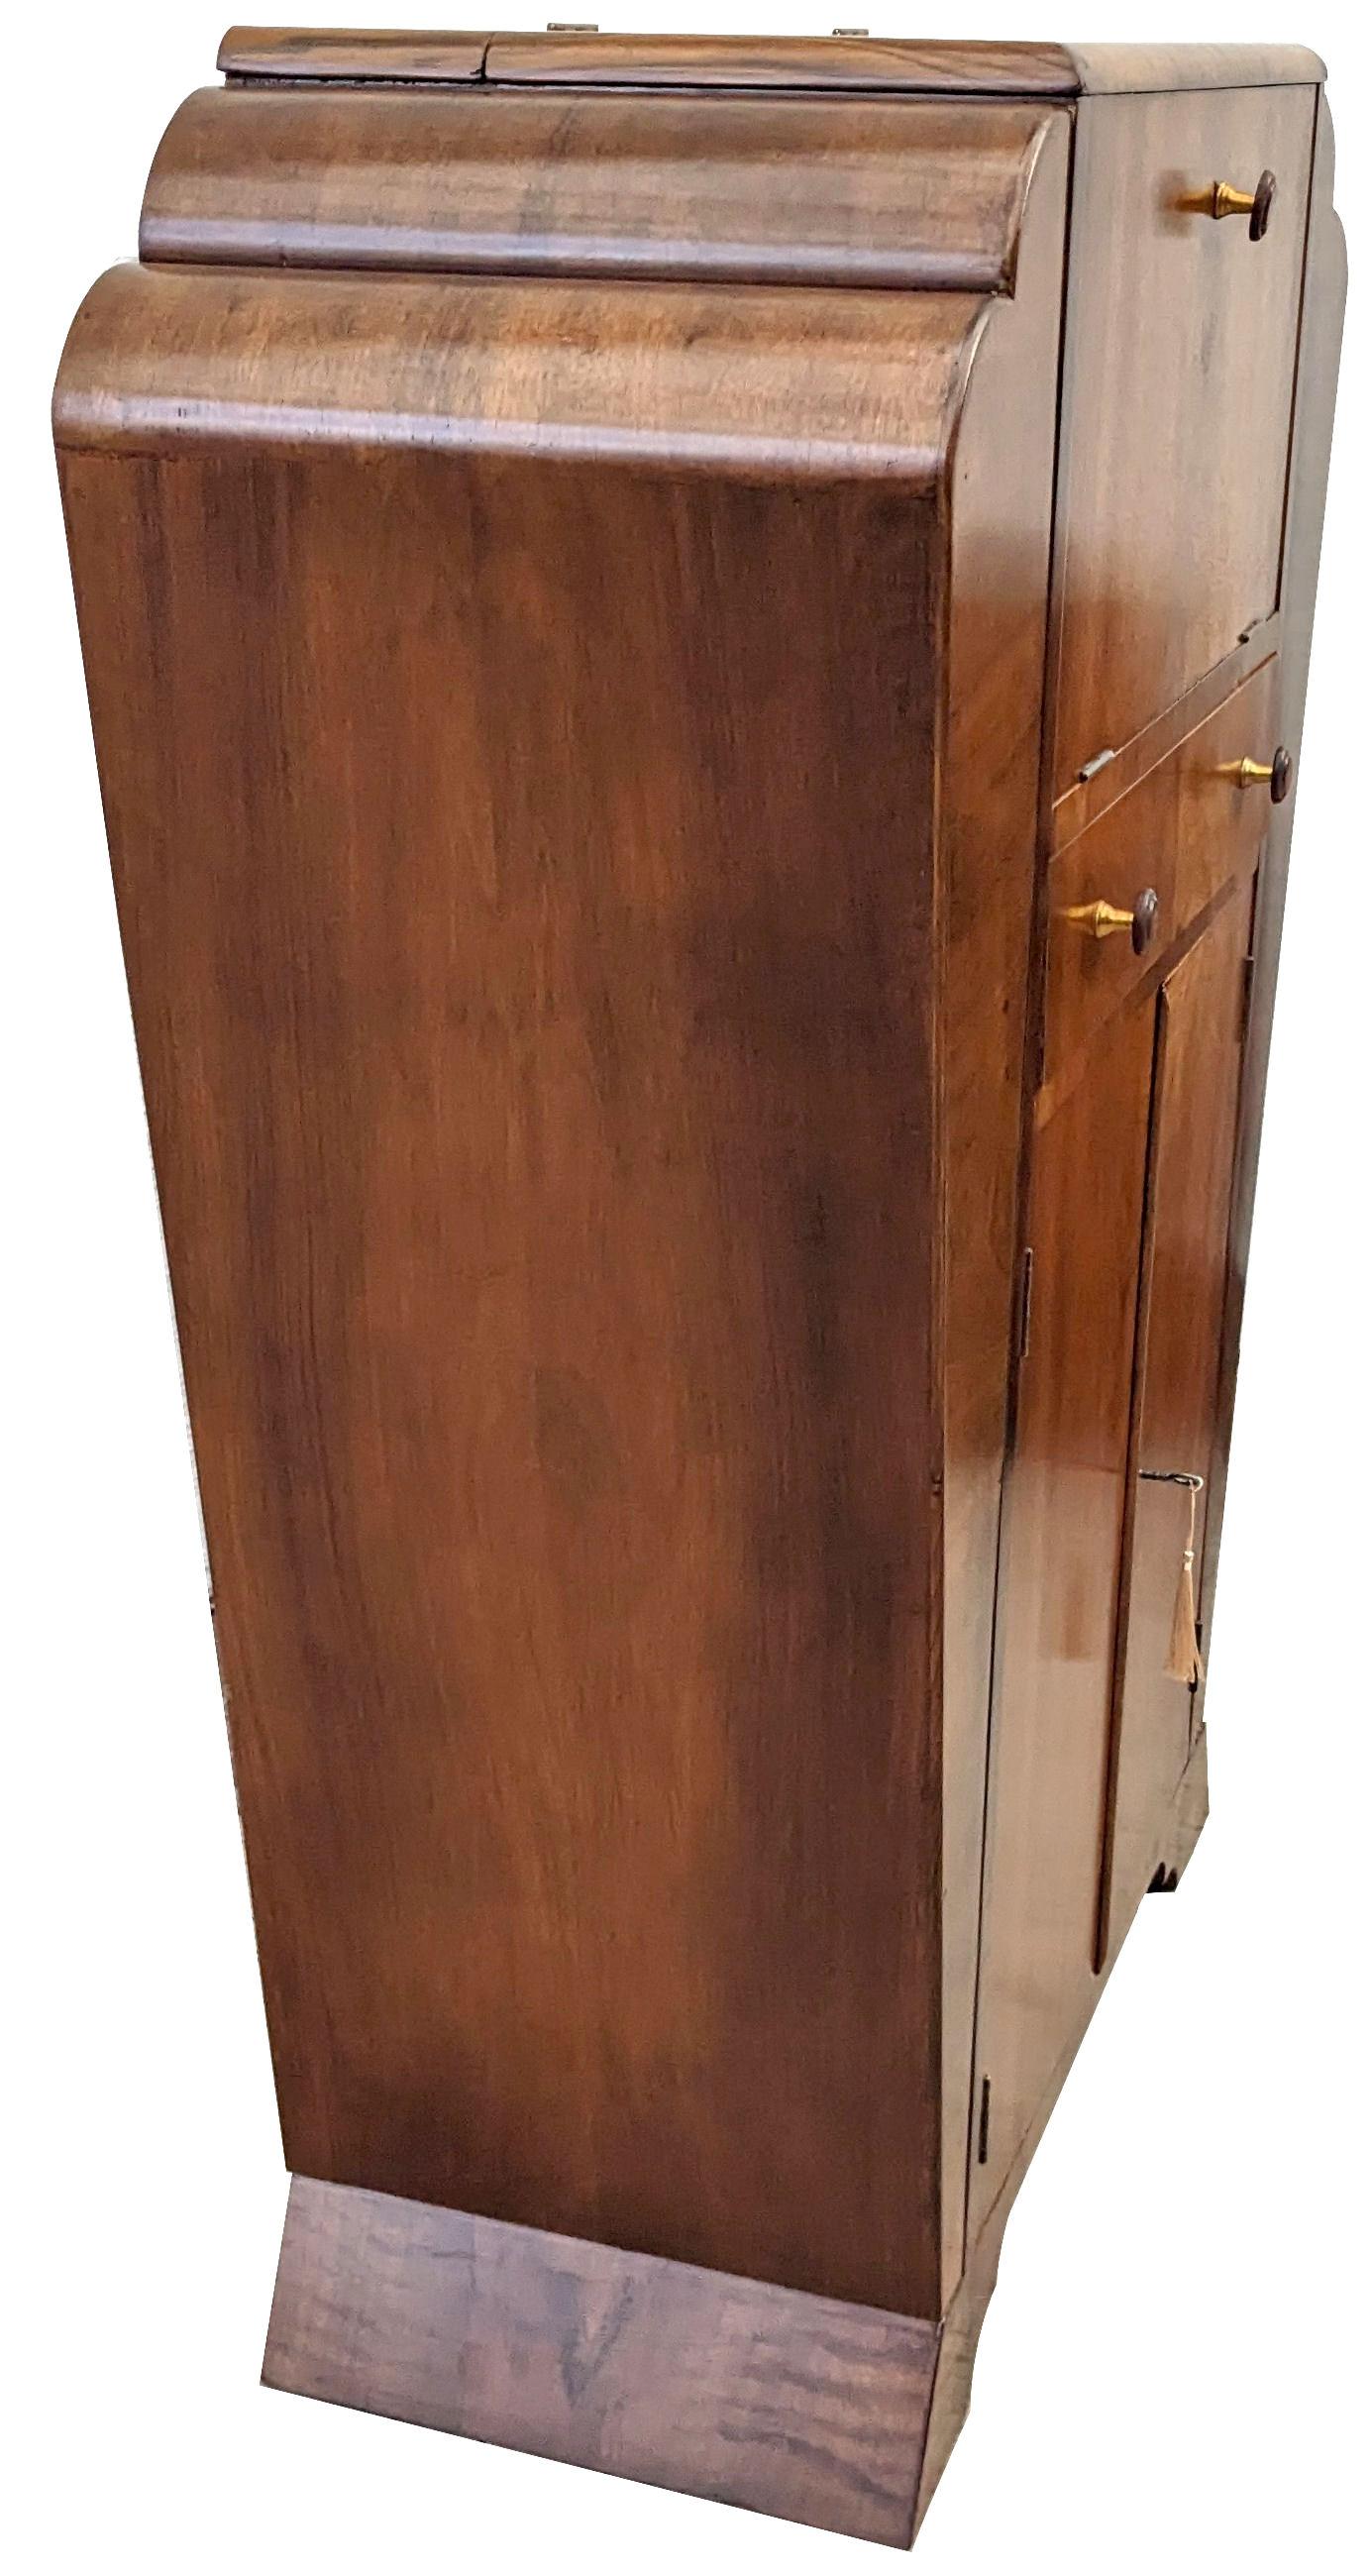 Art Deco Odeon Shaped Dry Bar Cocktail Cabinet, English, c1930 For Sale 5